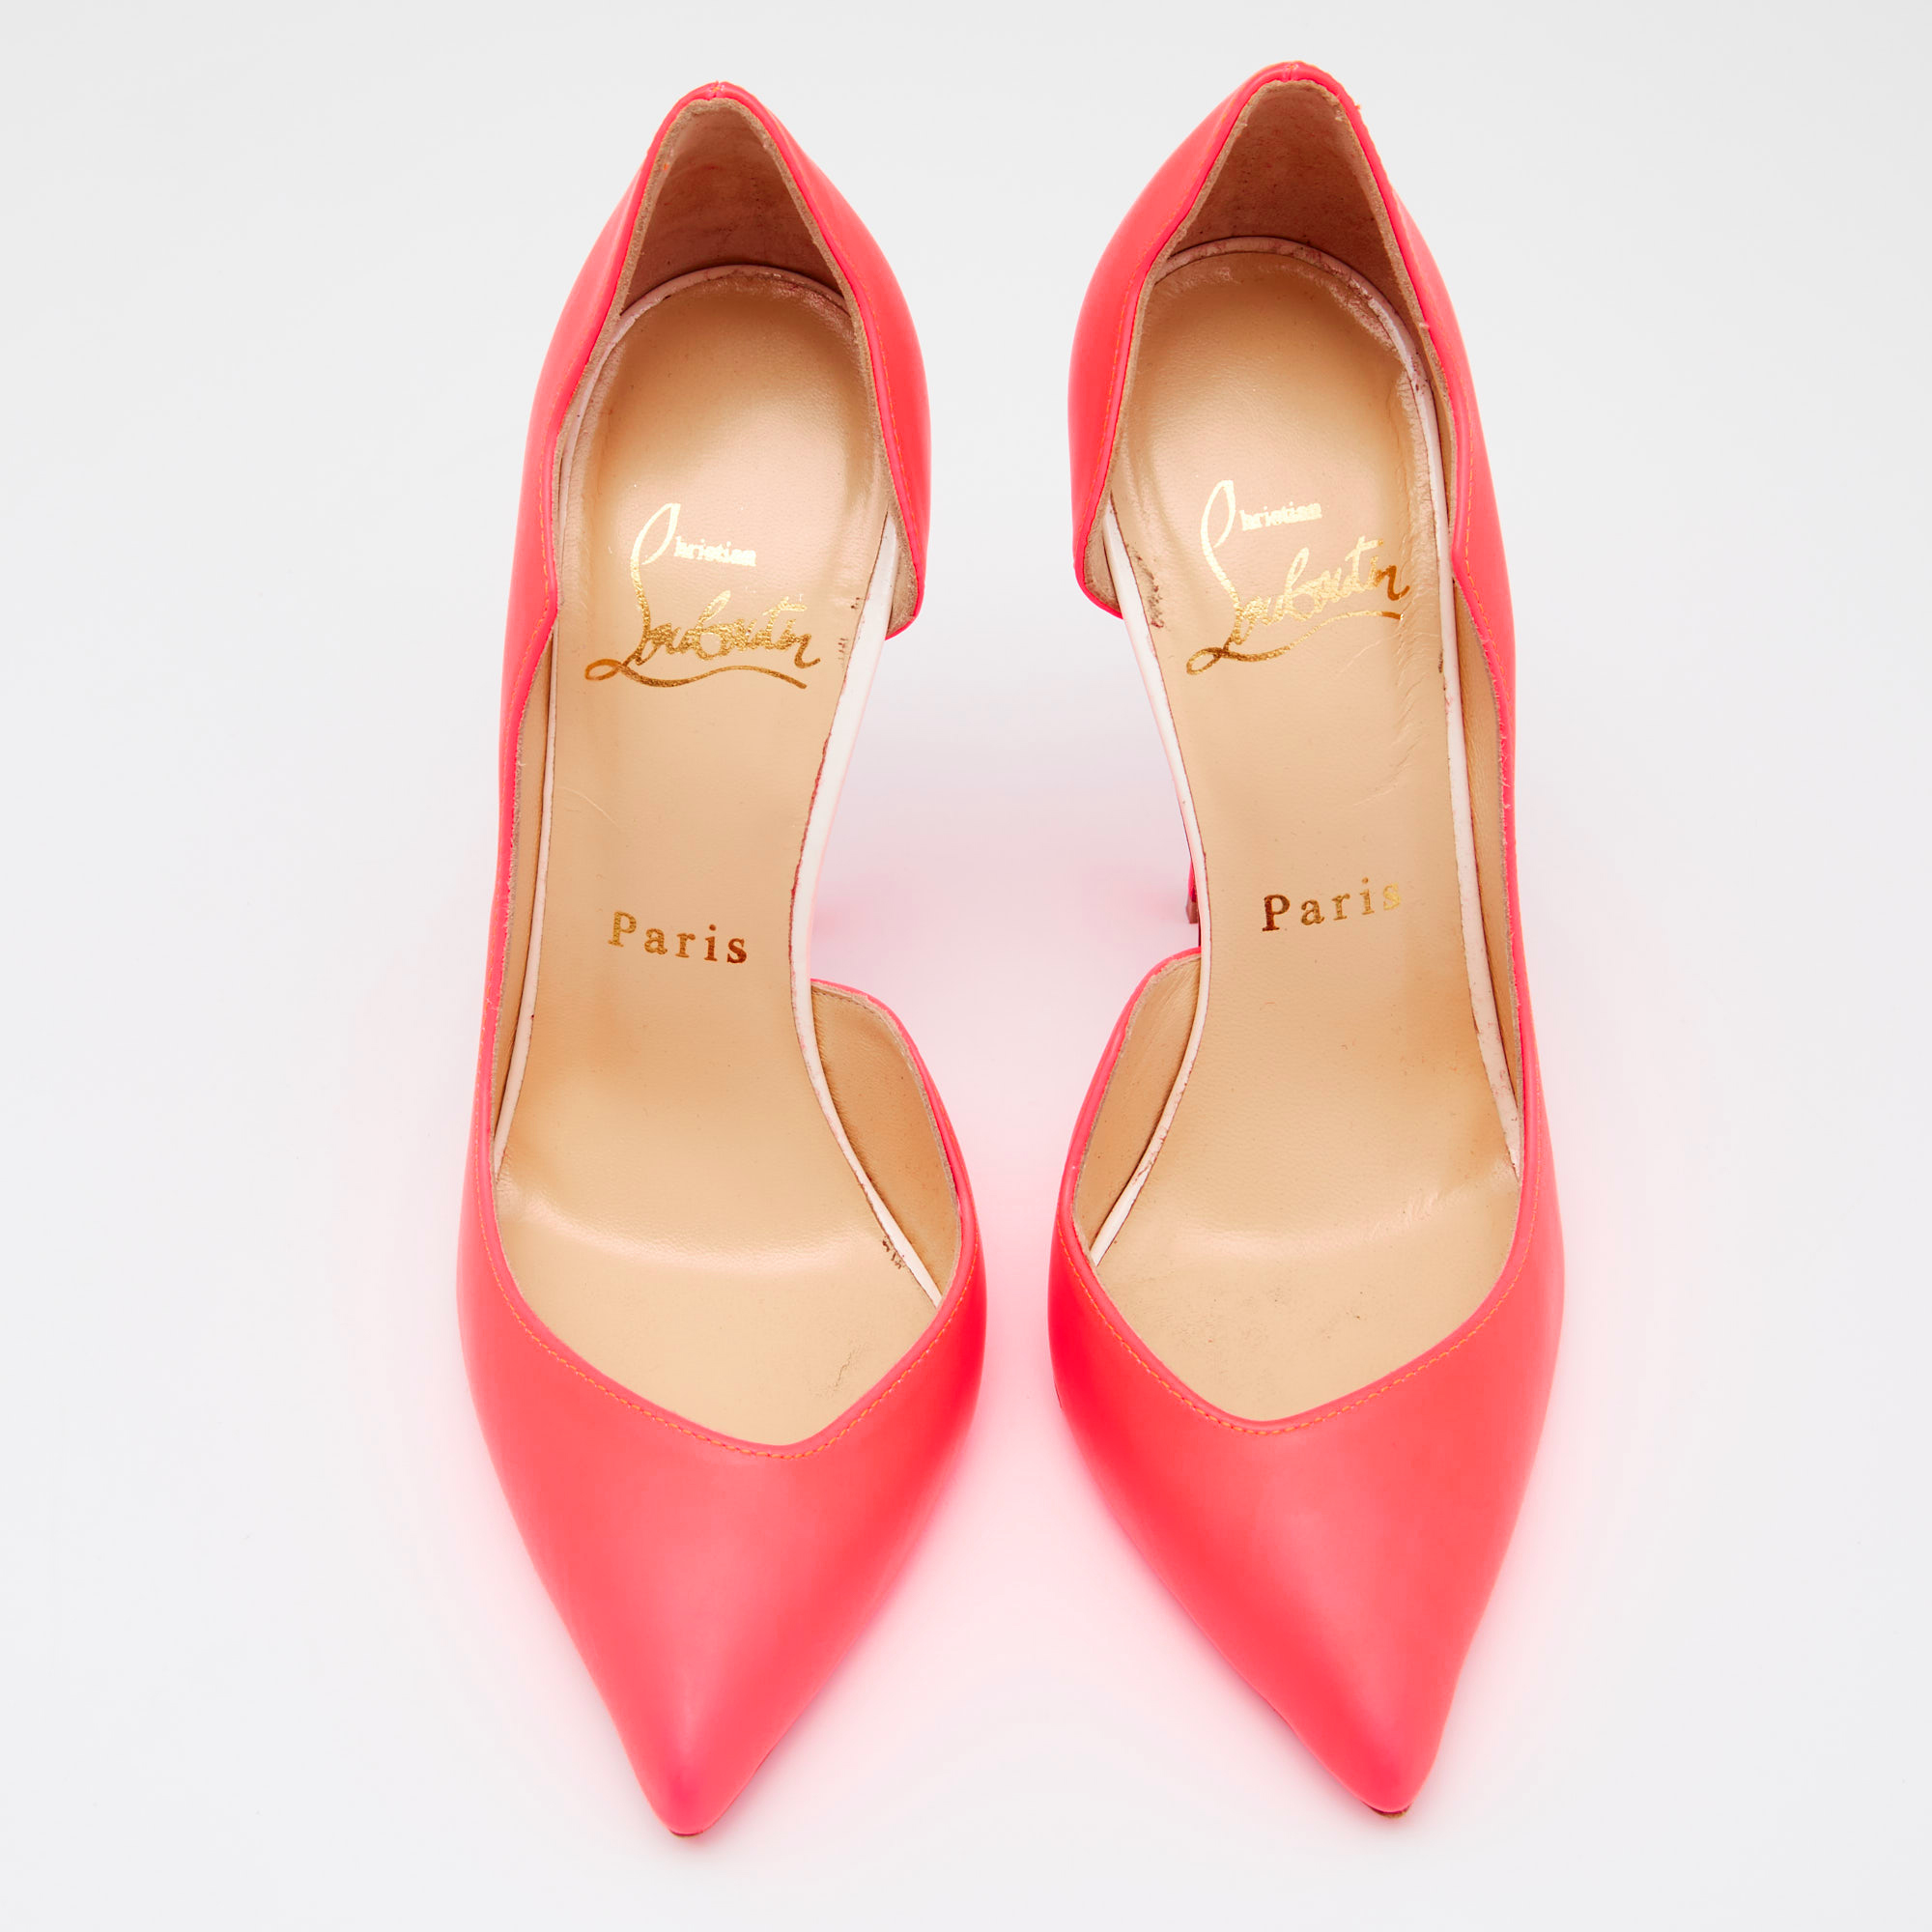 Christian Louboutin Neon Pink Leather Dalida D'orsay Pumps Size 35